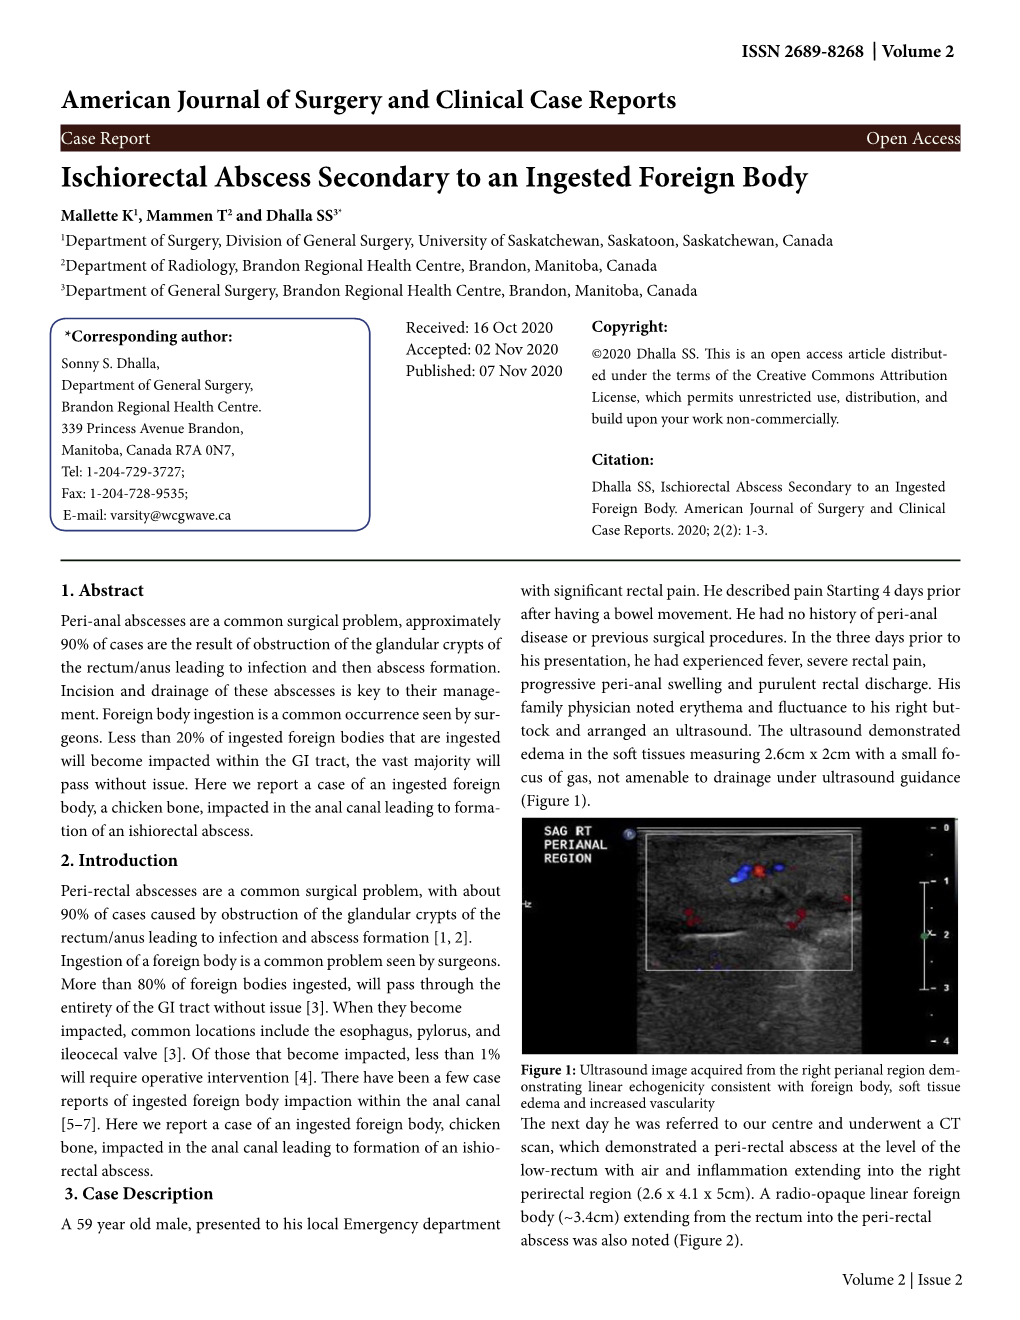 Ischiorectal Abscess Secondary to an Ingested Foreign Body